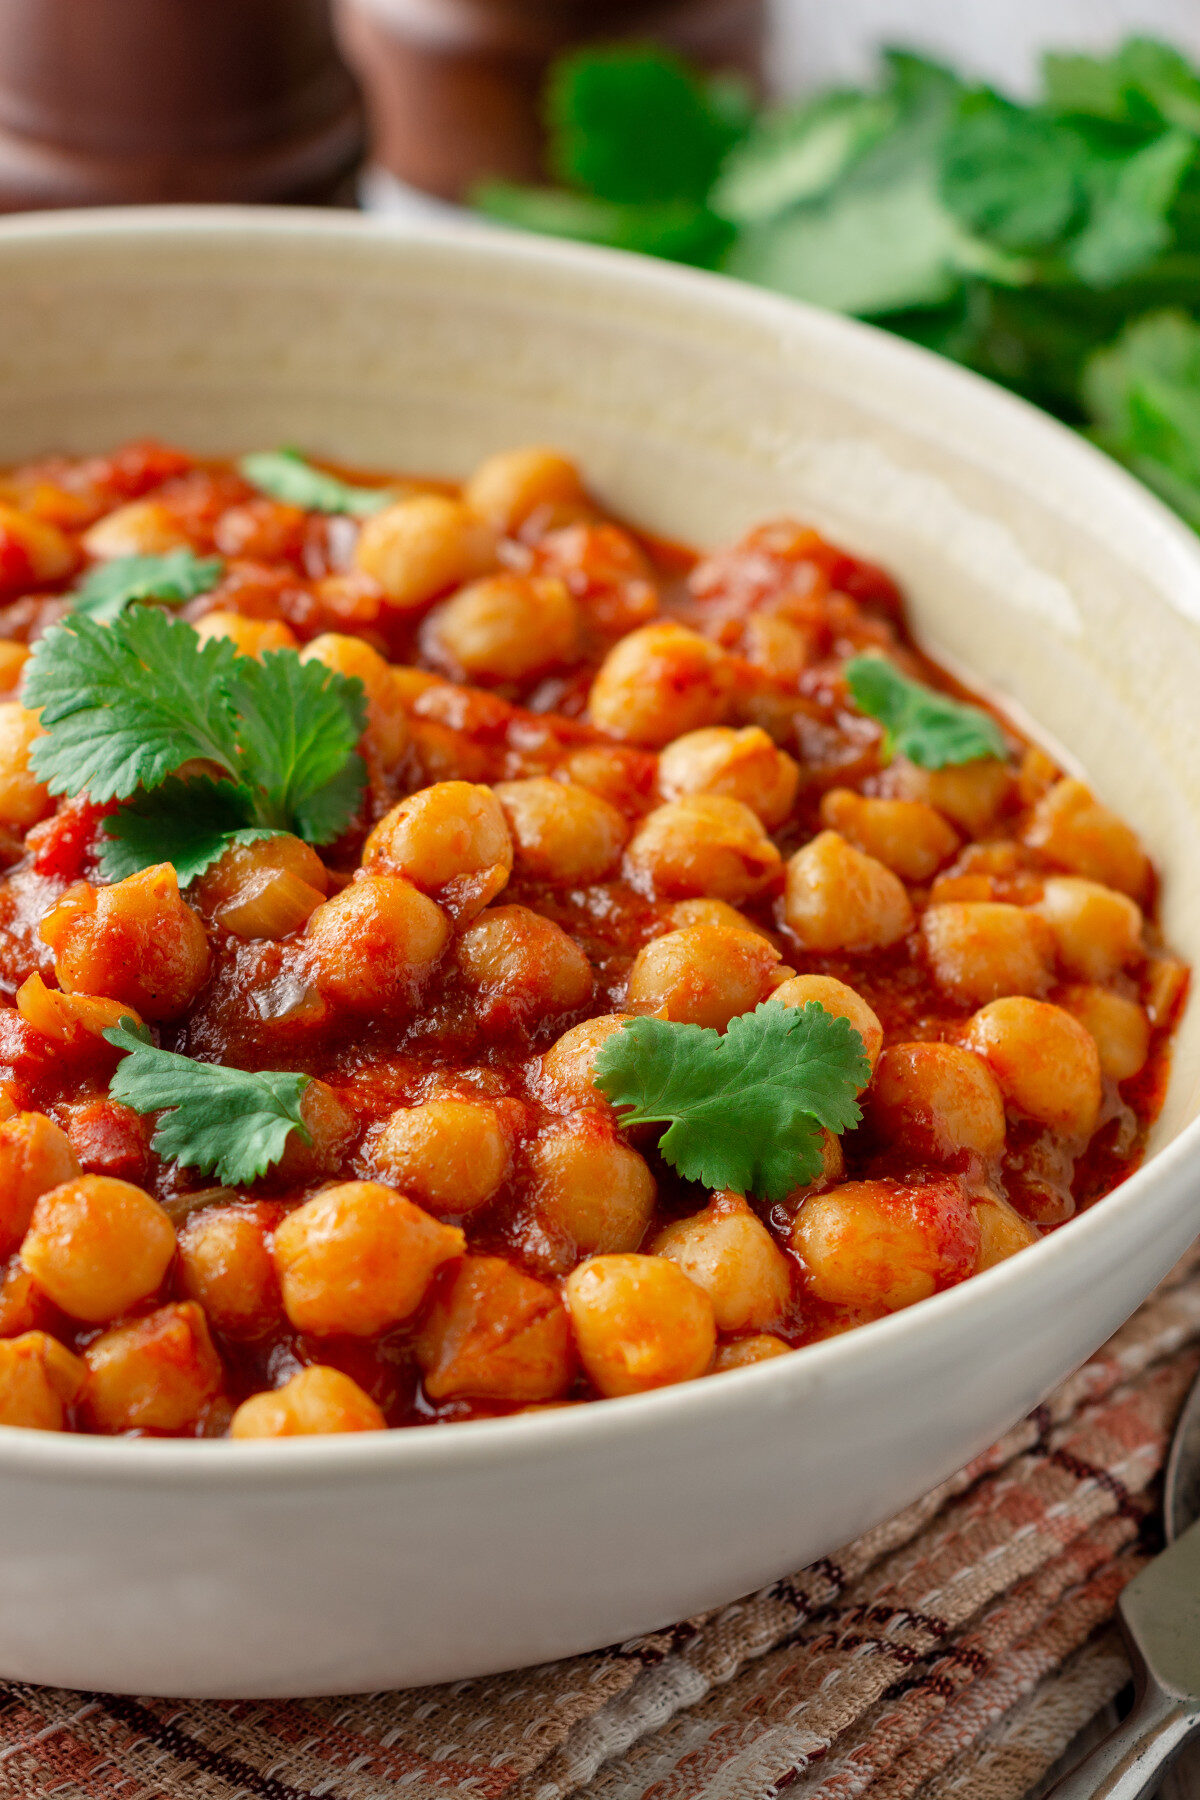 Spicy Chickpea curry Chana Masala with canned chickpeas.